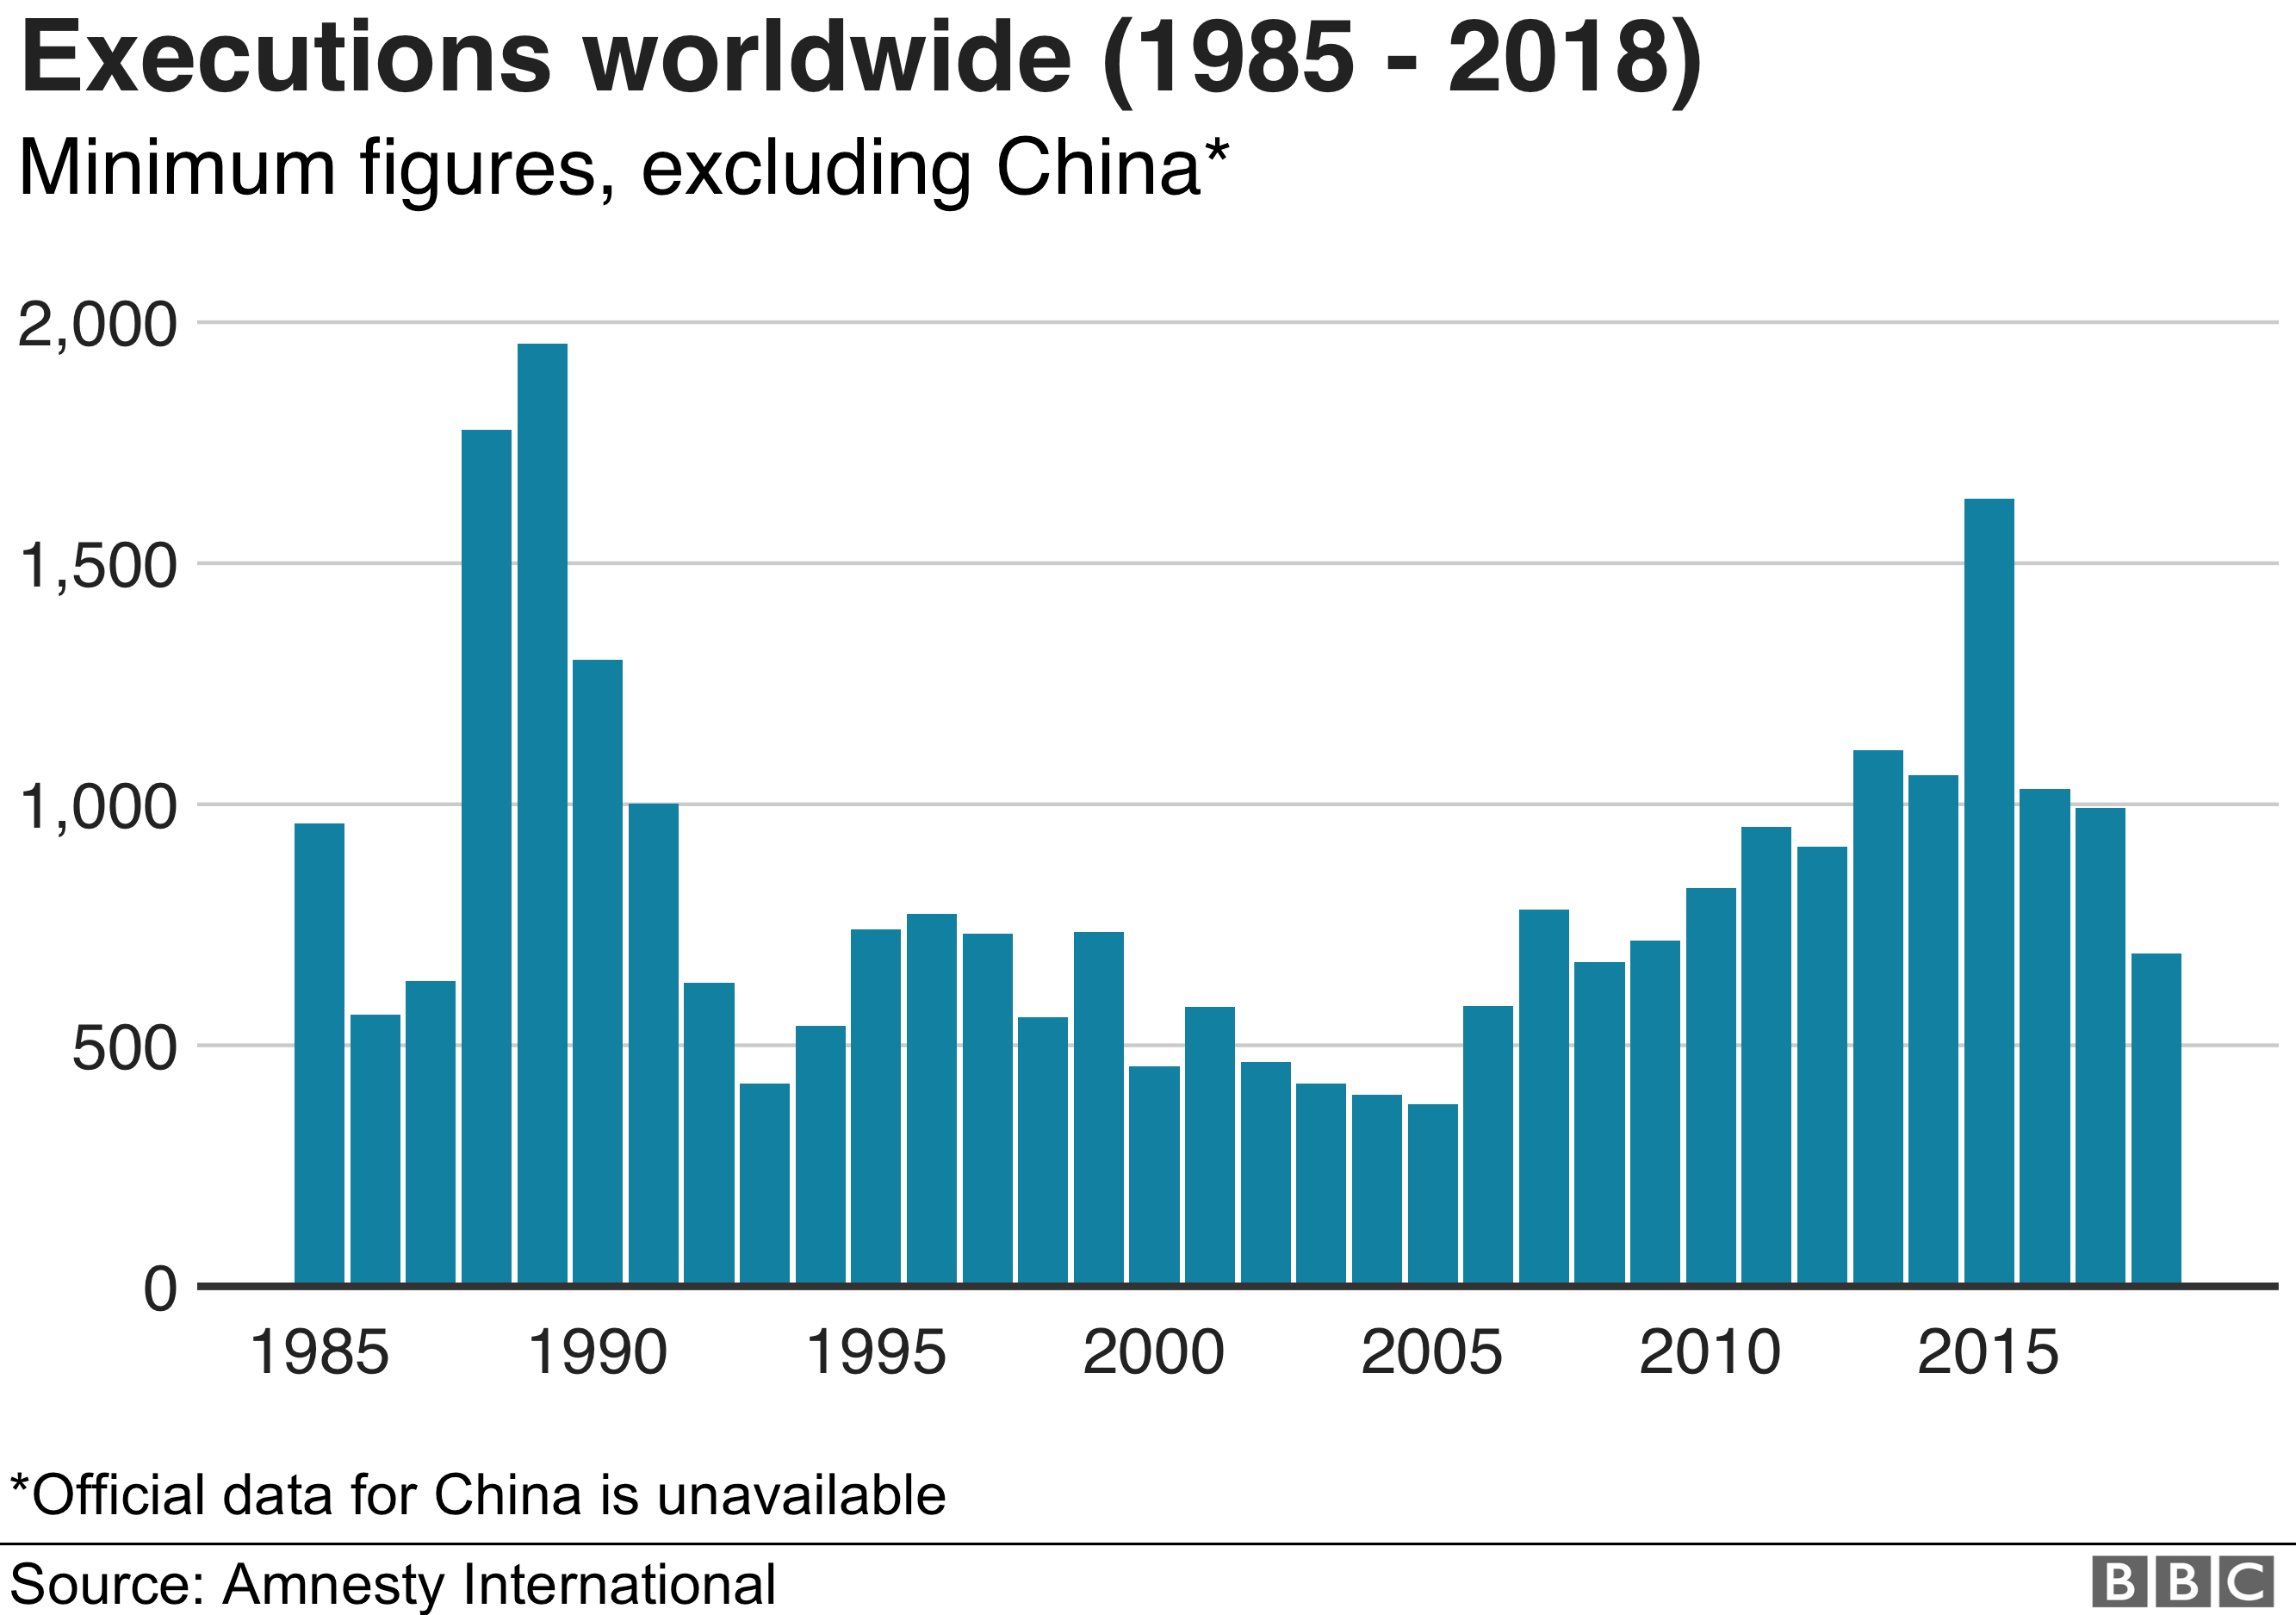 Number of executions worldwide